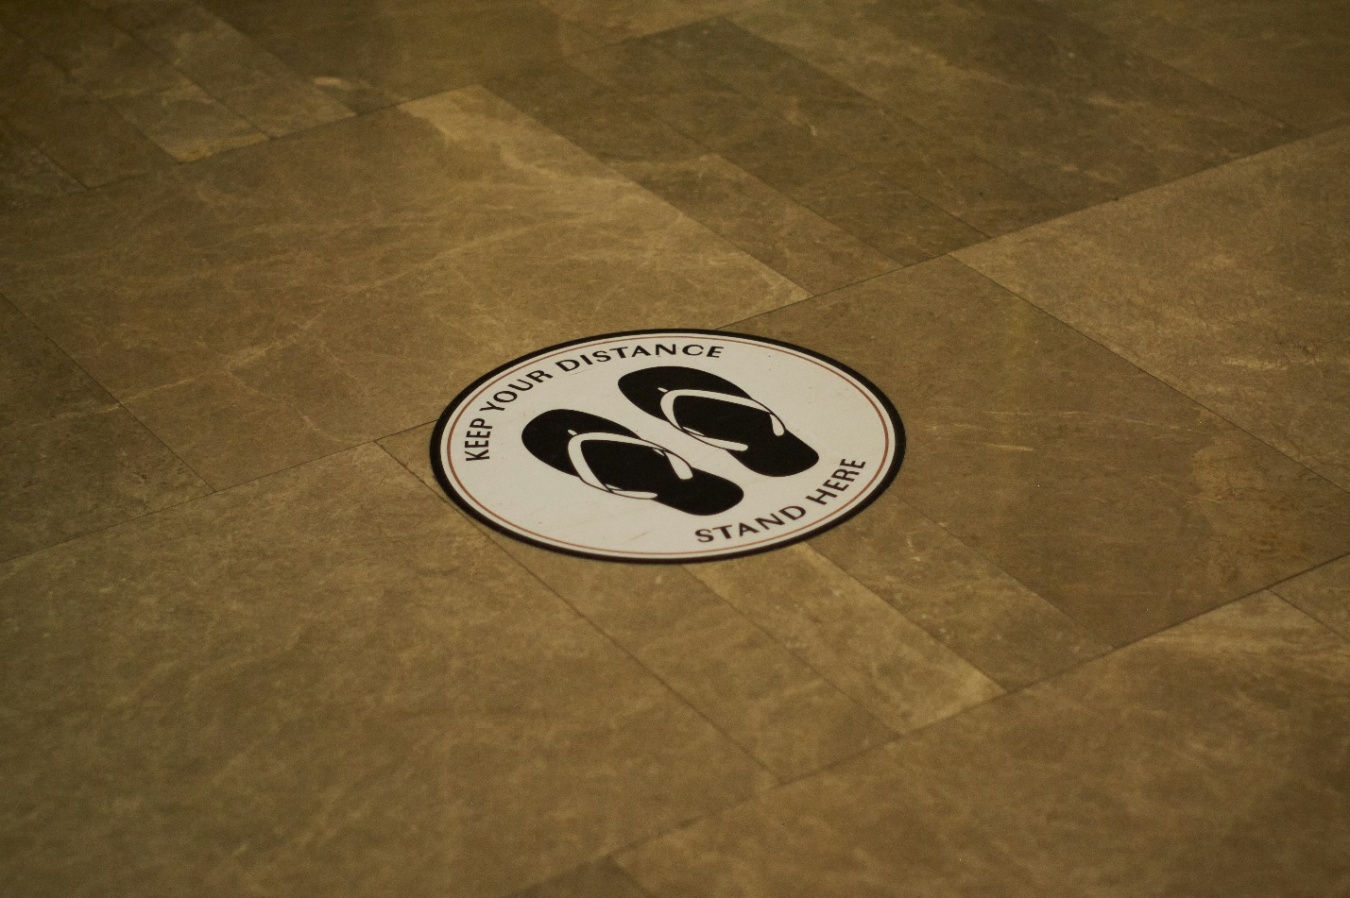 "Stand Here" decal printed on a tile floor